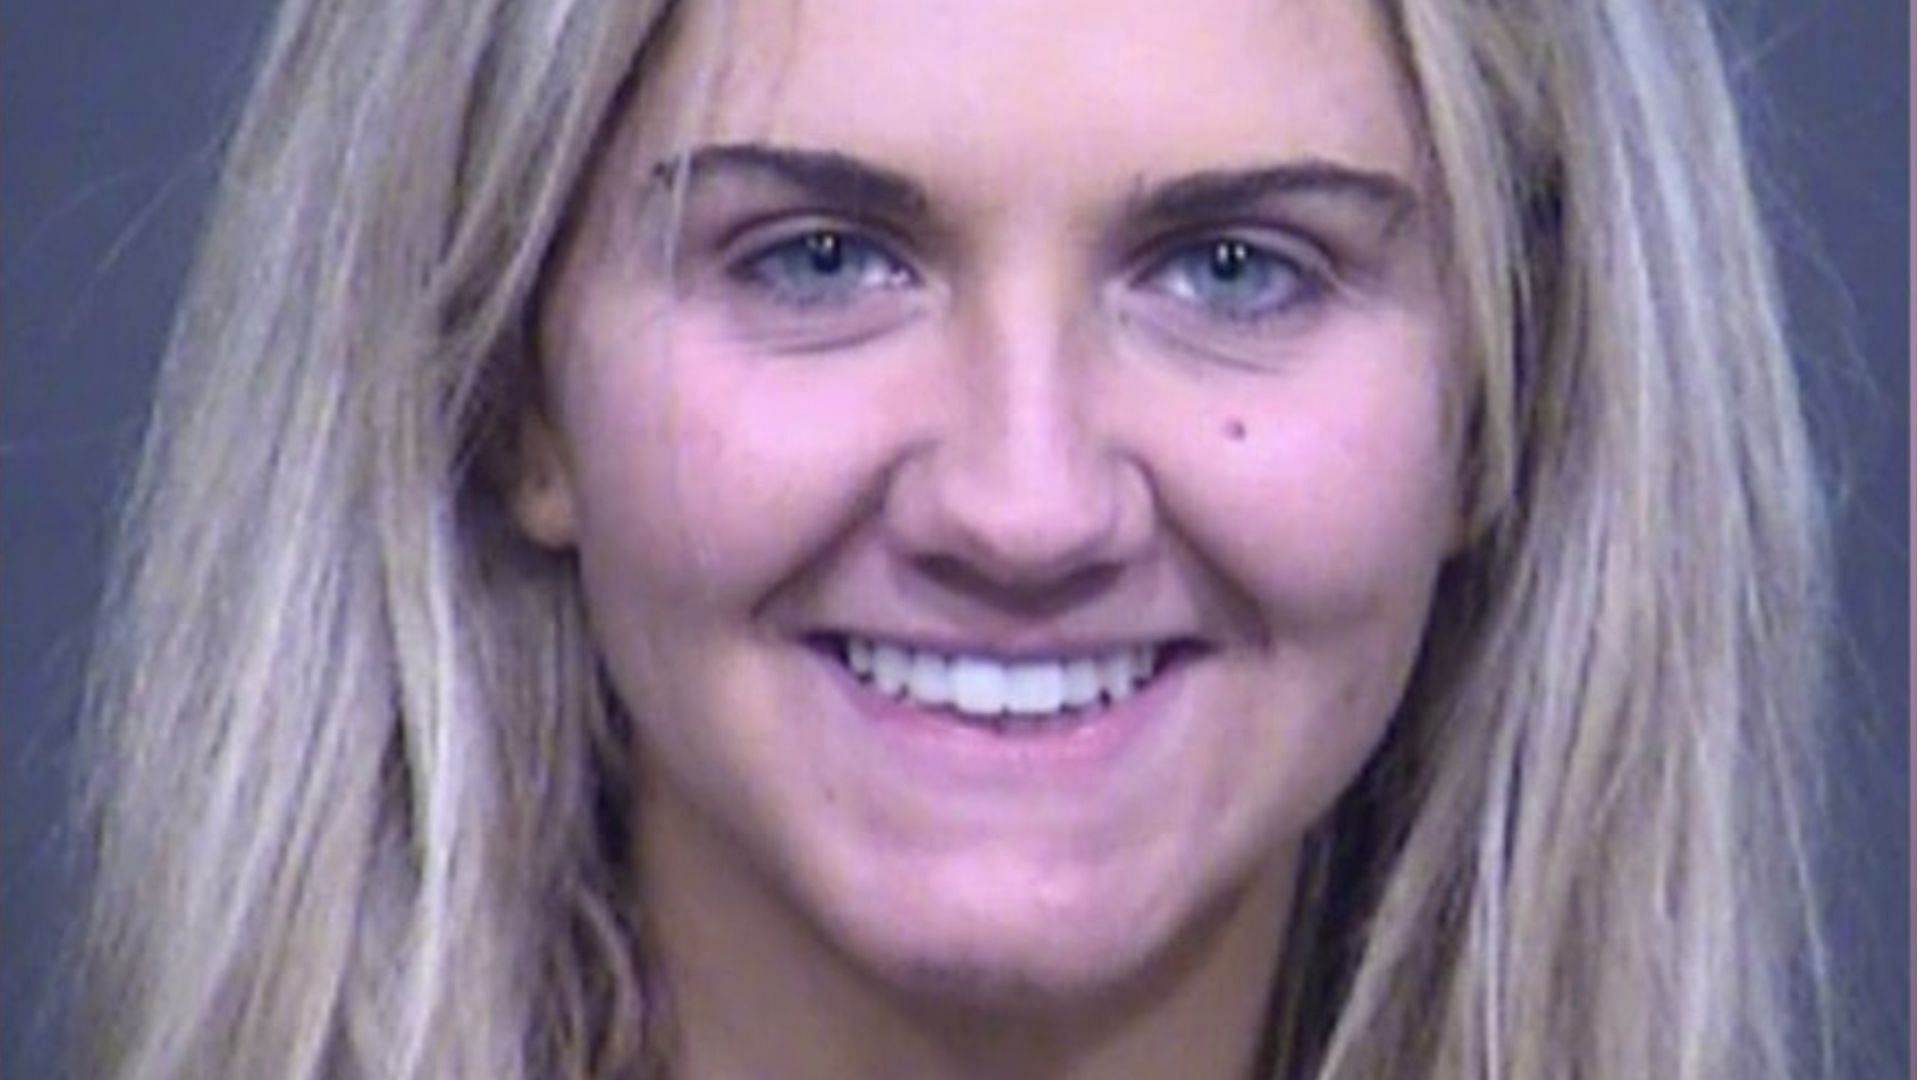 Clare Margaret Meacham was seen smiling widely in her mugshot following her arrest for DUI and child abuse (Image via Maricopa County Sheriff